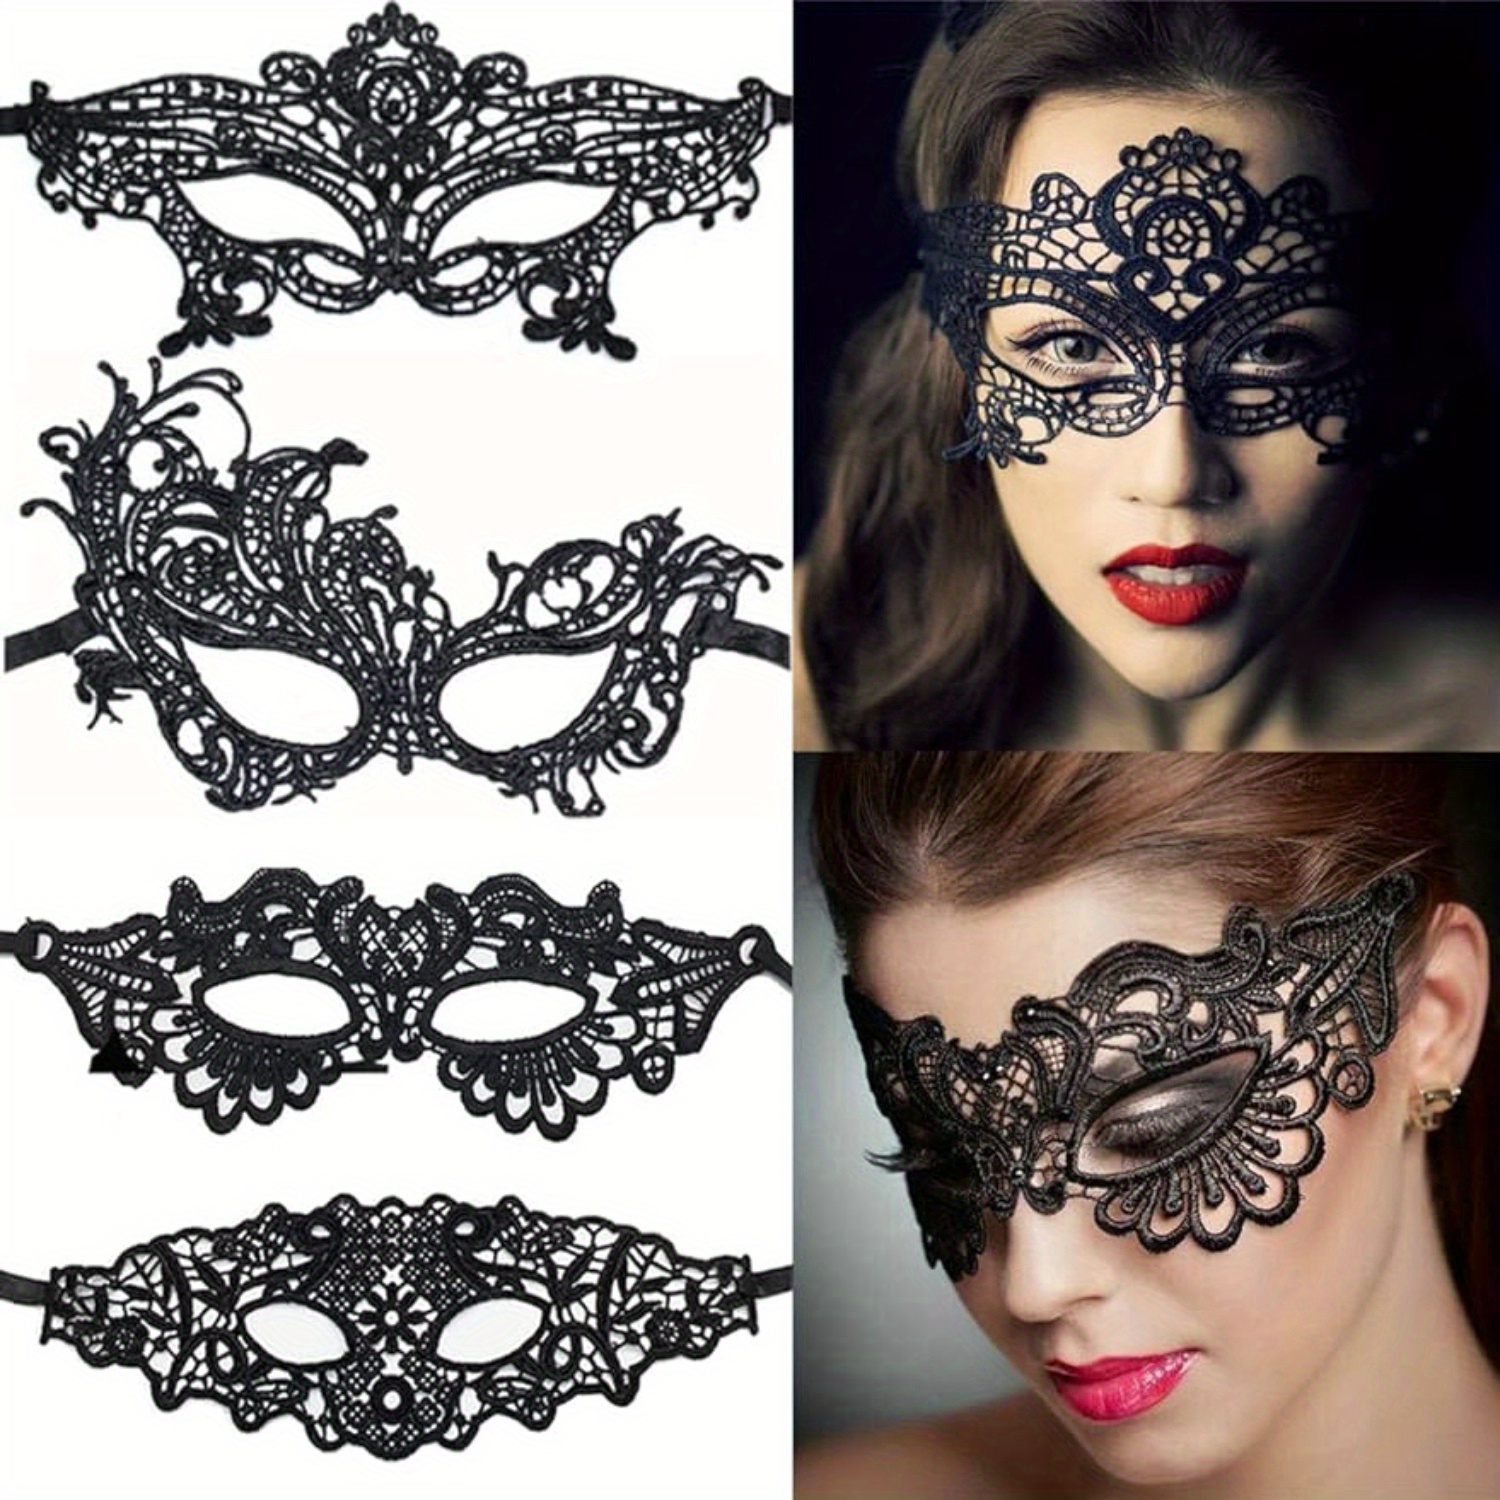 

4-pack Fabric Lace Eye Masks For Women - Elegant Masquerade Halloween Christmas Party Cosplay Accessories